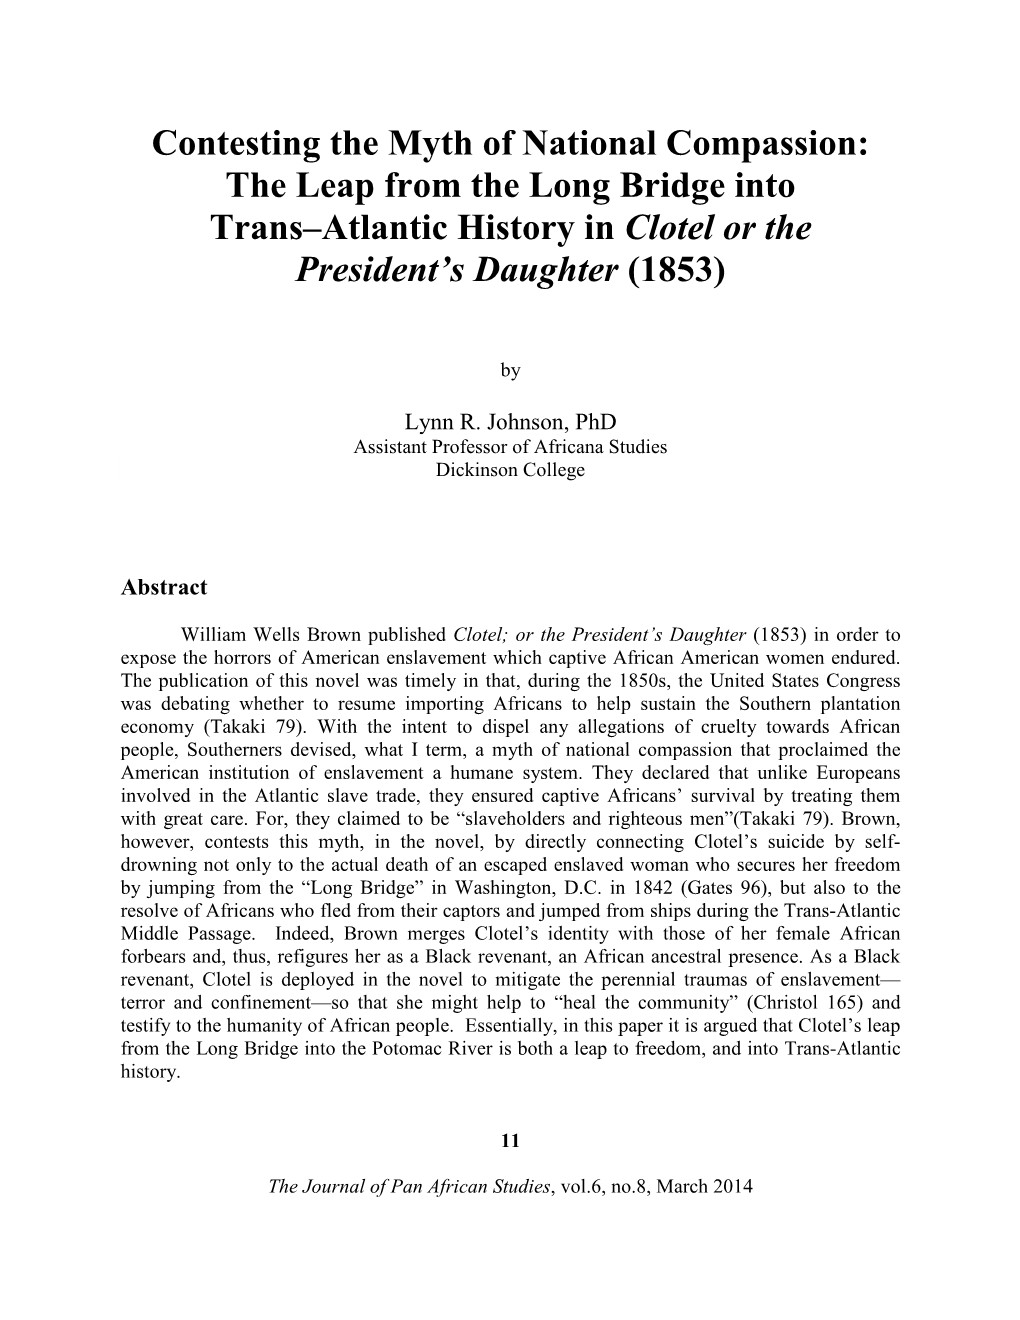 The Leap from the Long Bridge Into Trans–Atlantic History in Clotel Or the President’S Daughter (1853)